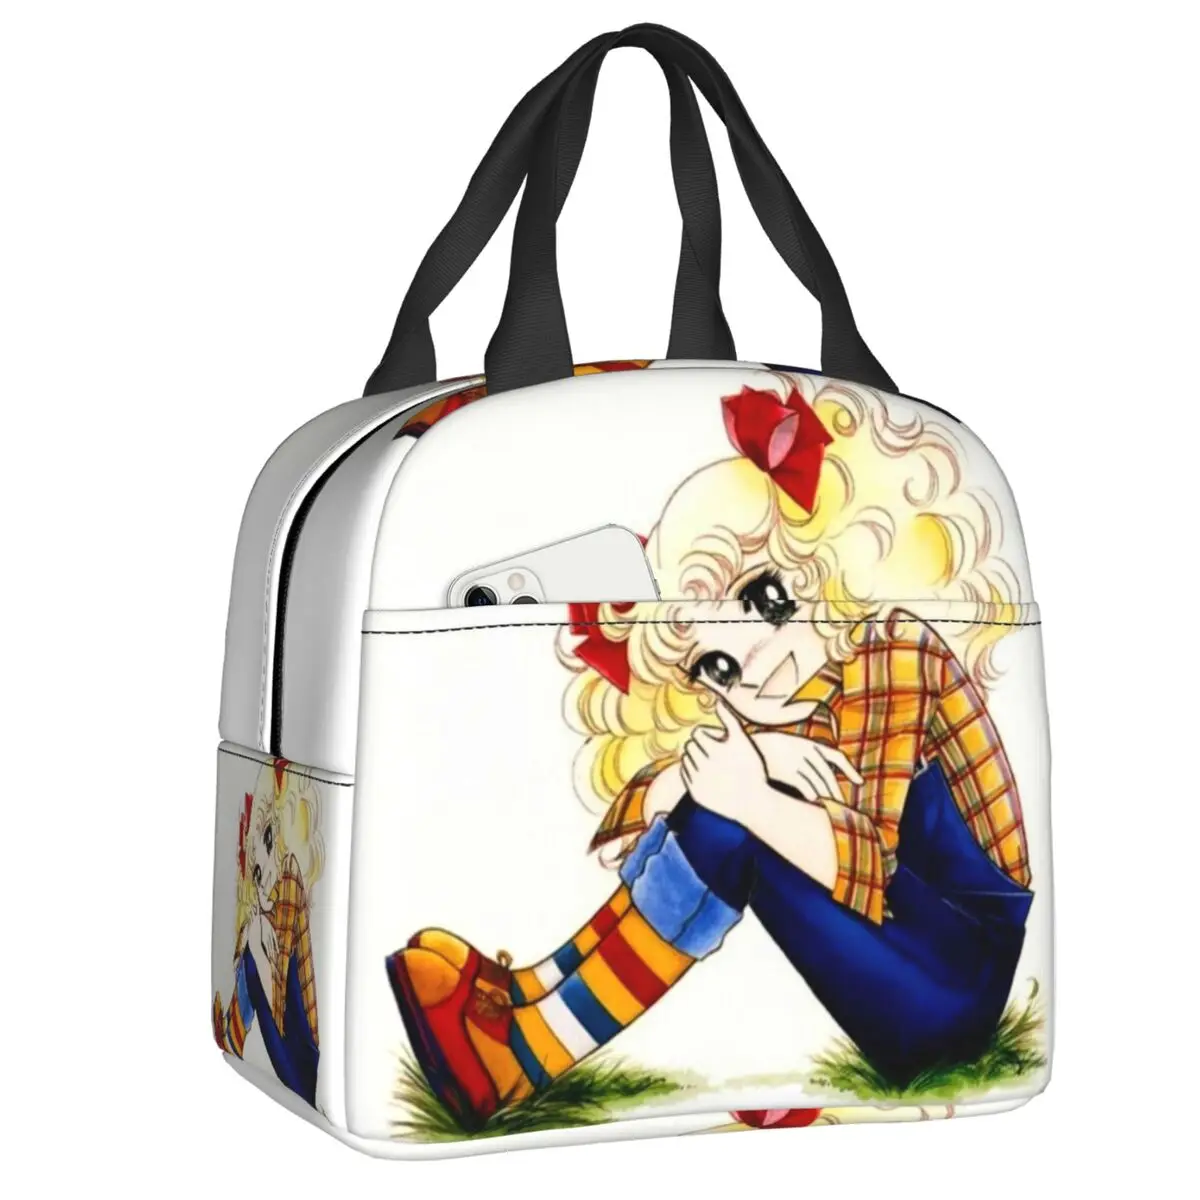 Candy Candy Anime Manga Insulated Lunch Bags for Outdoor Picnic Leakproof Cooler Thermal Lunch Box Women Kids